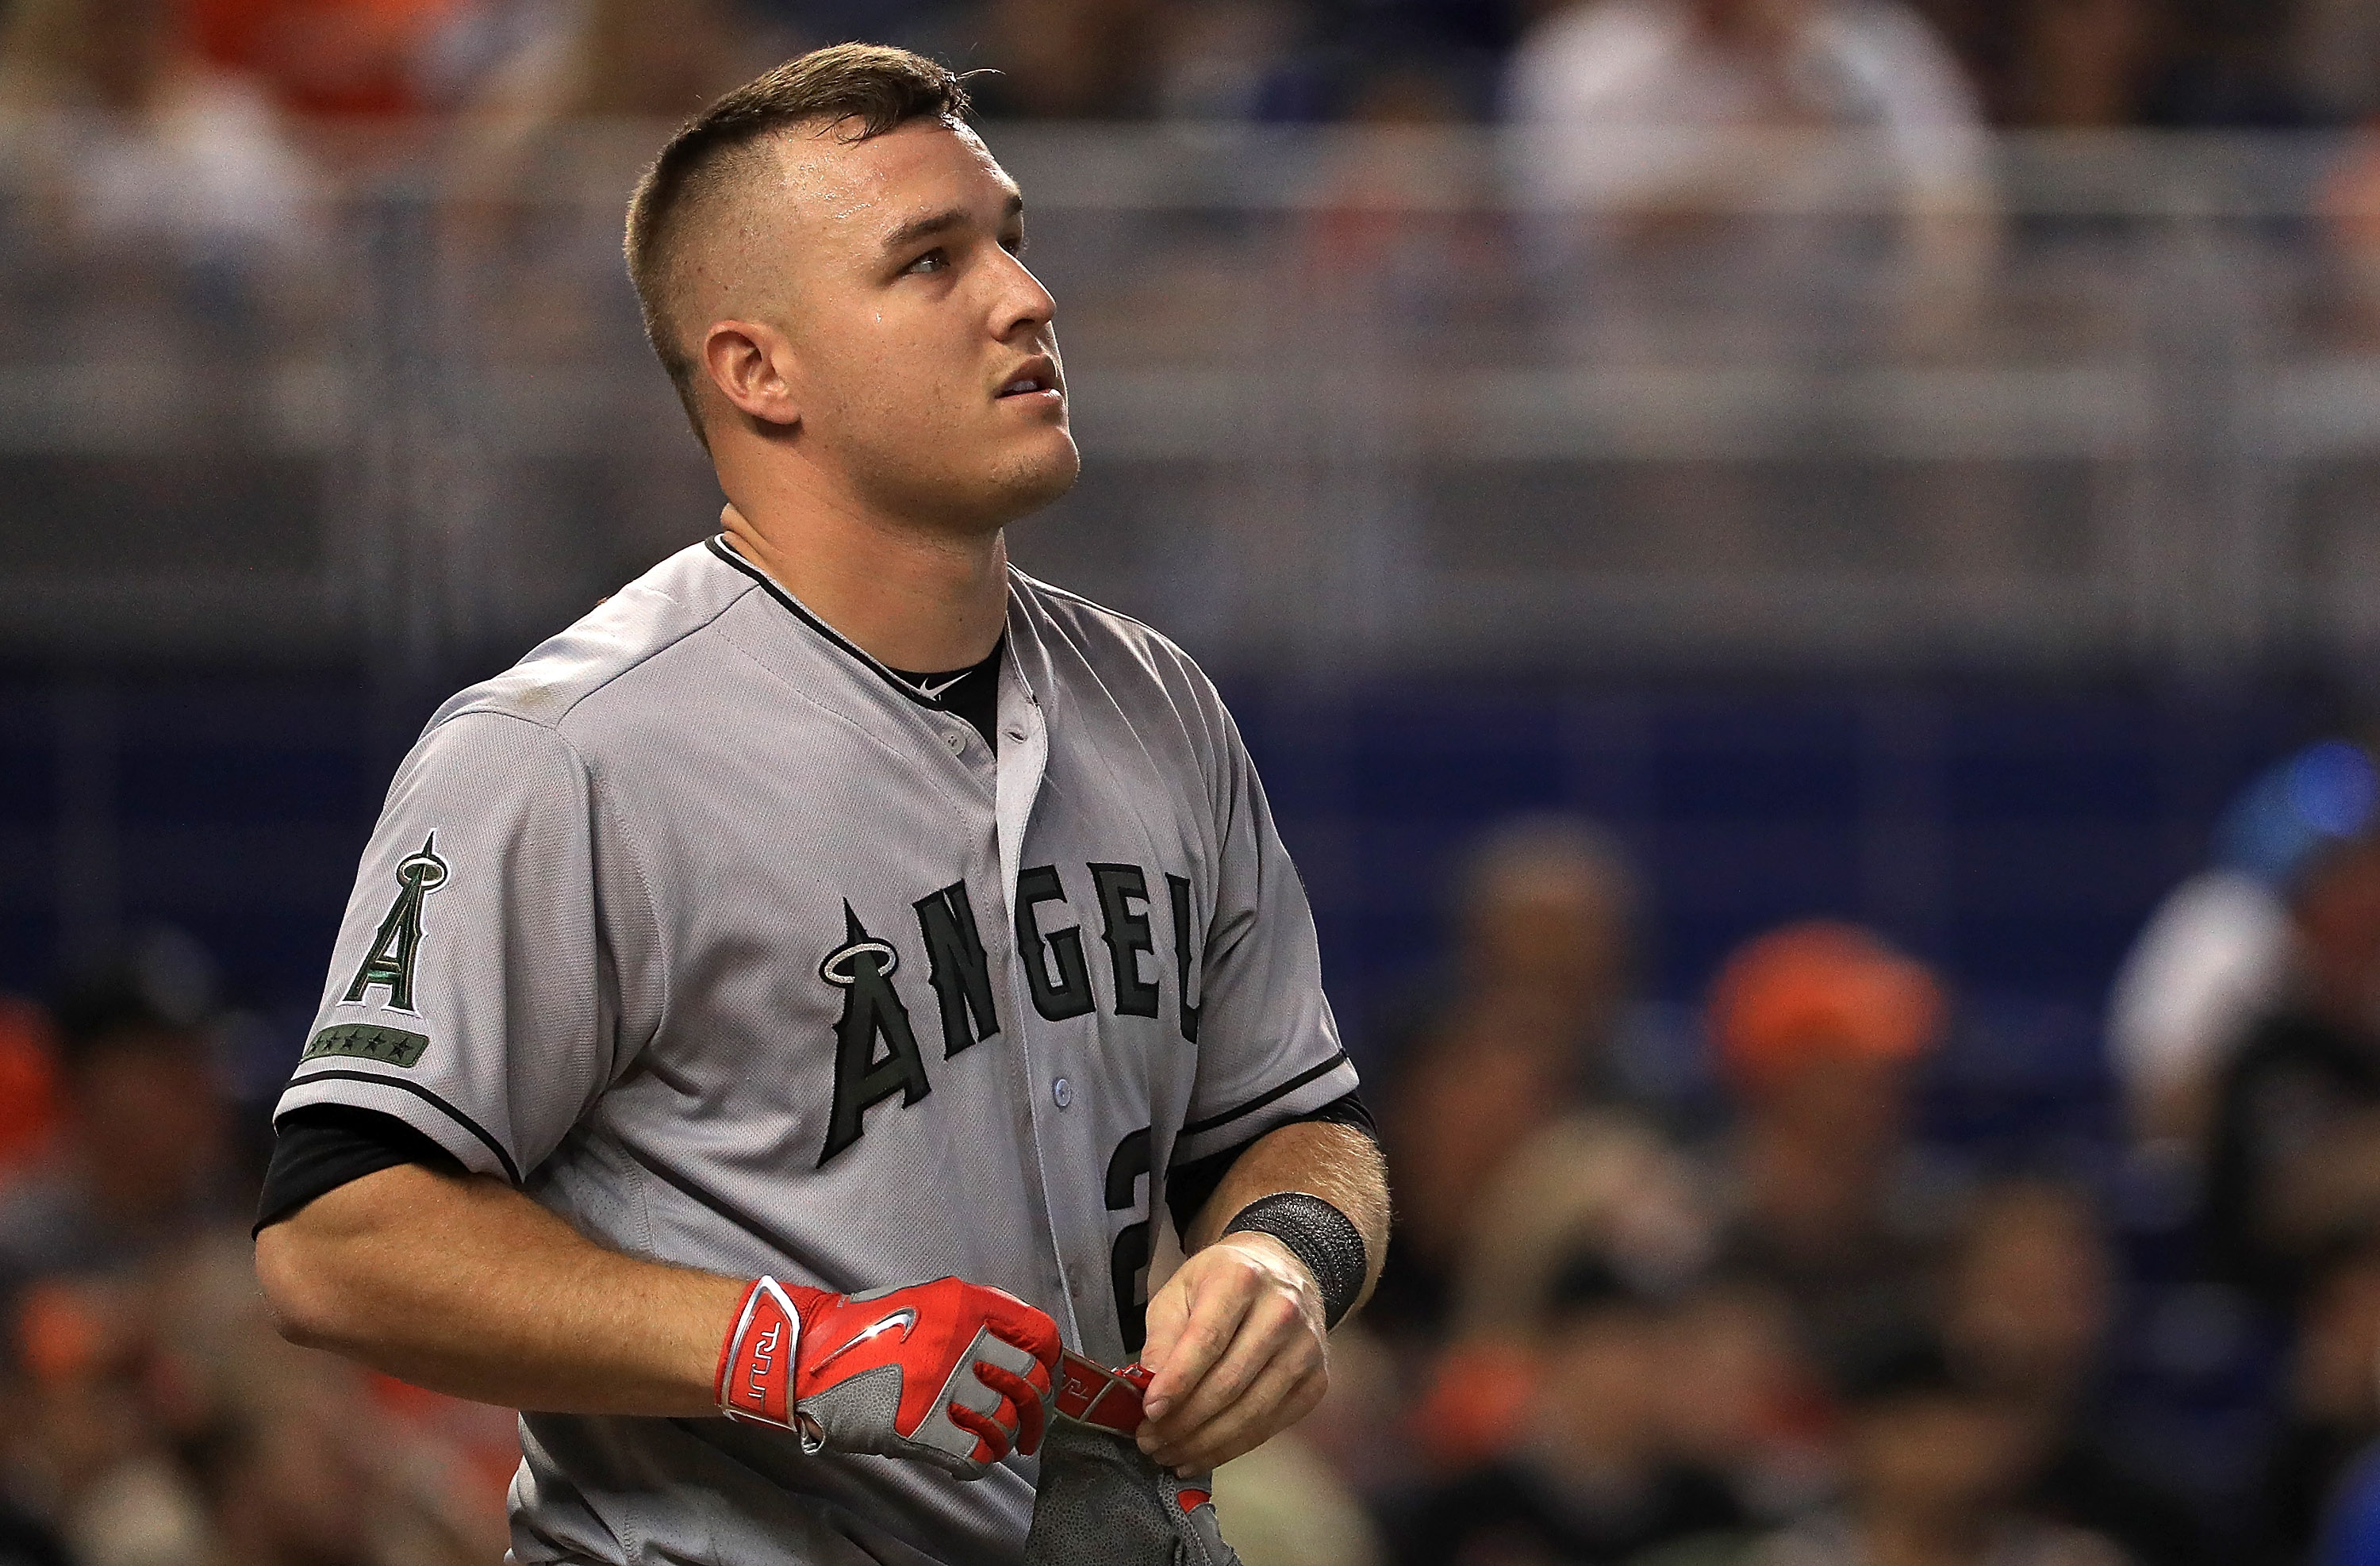 Angels' Mike Trout hit by pitch on hand, X-rays negative